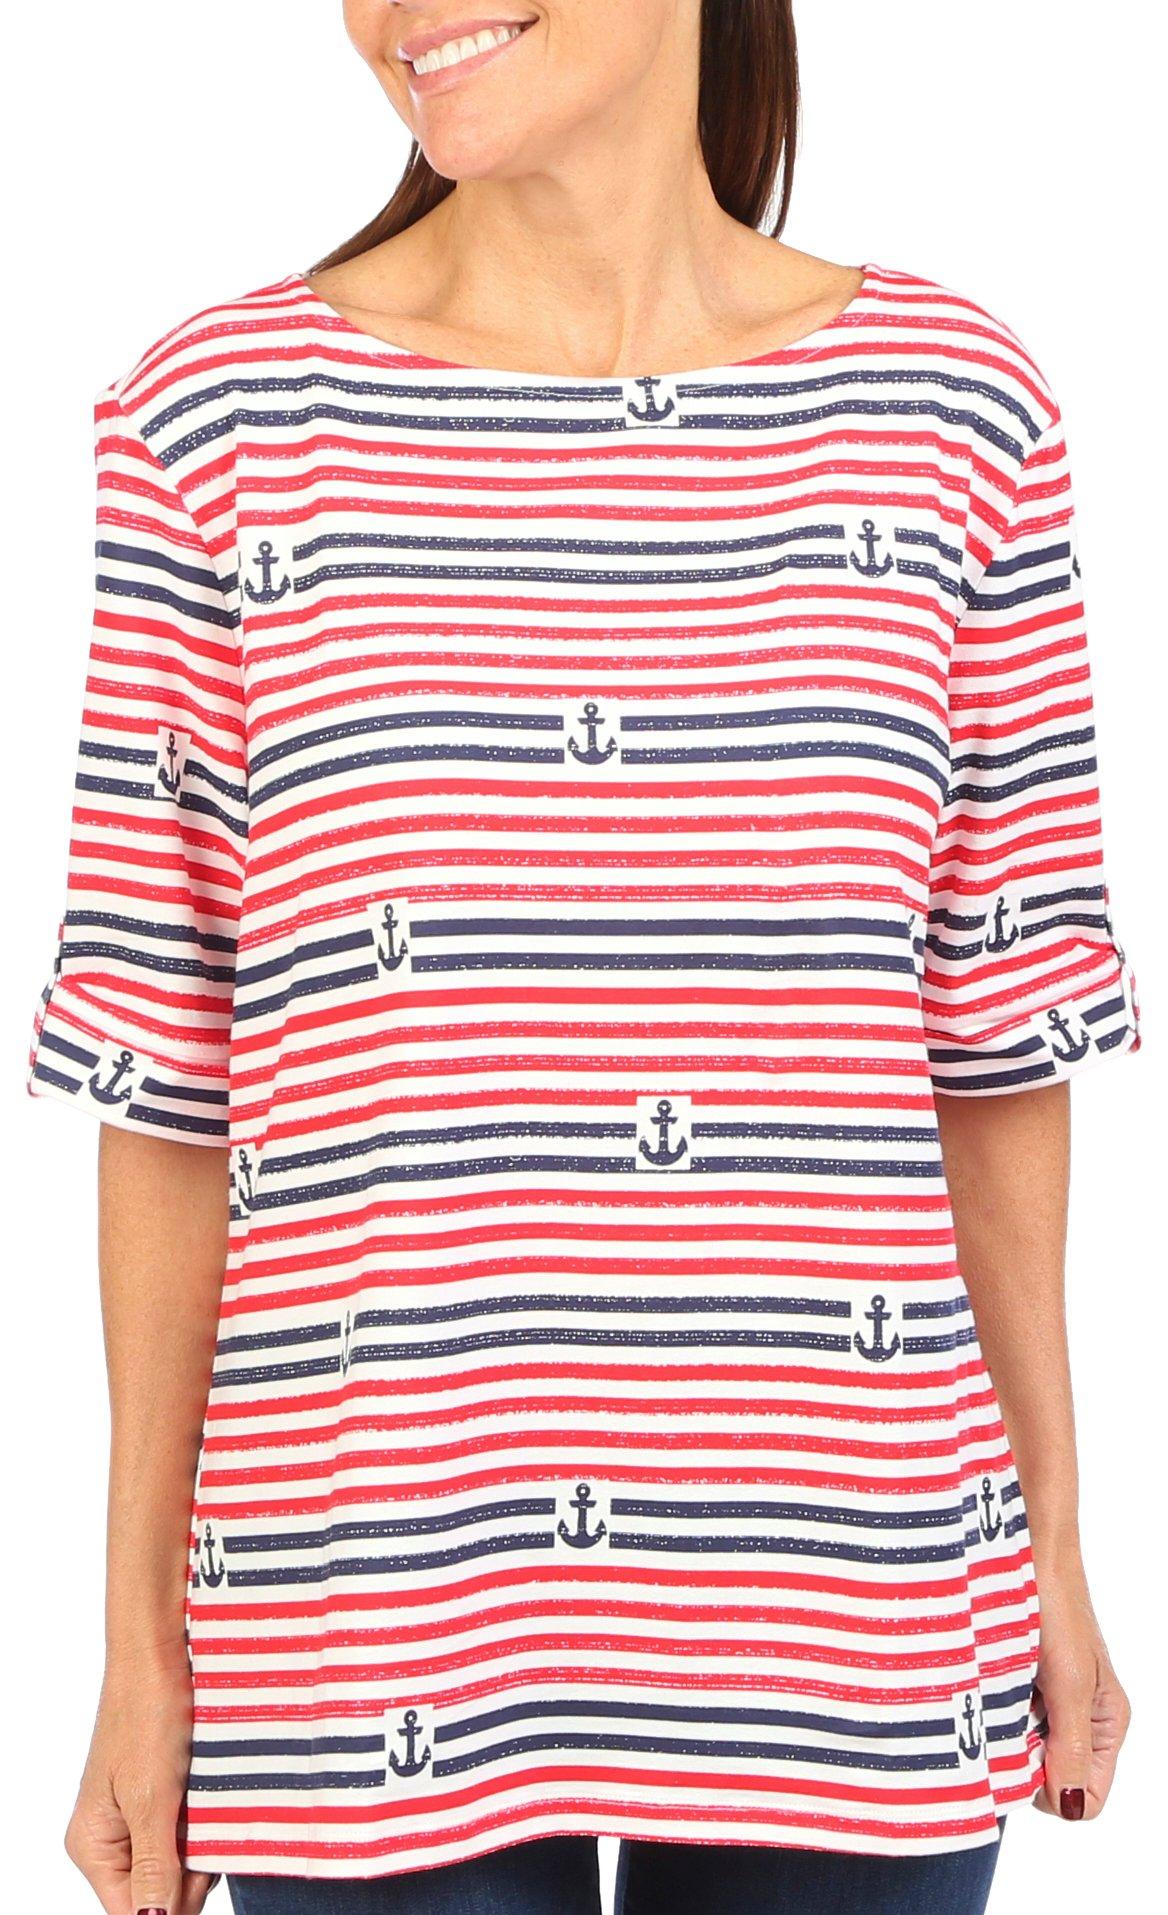 Petite Anchor & Stripes Boat Neck Short Sleeve Top